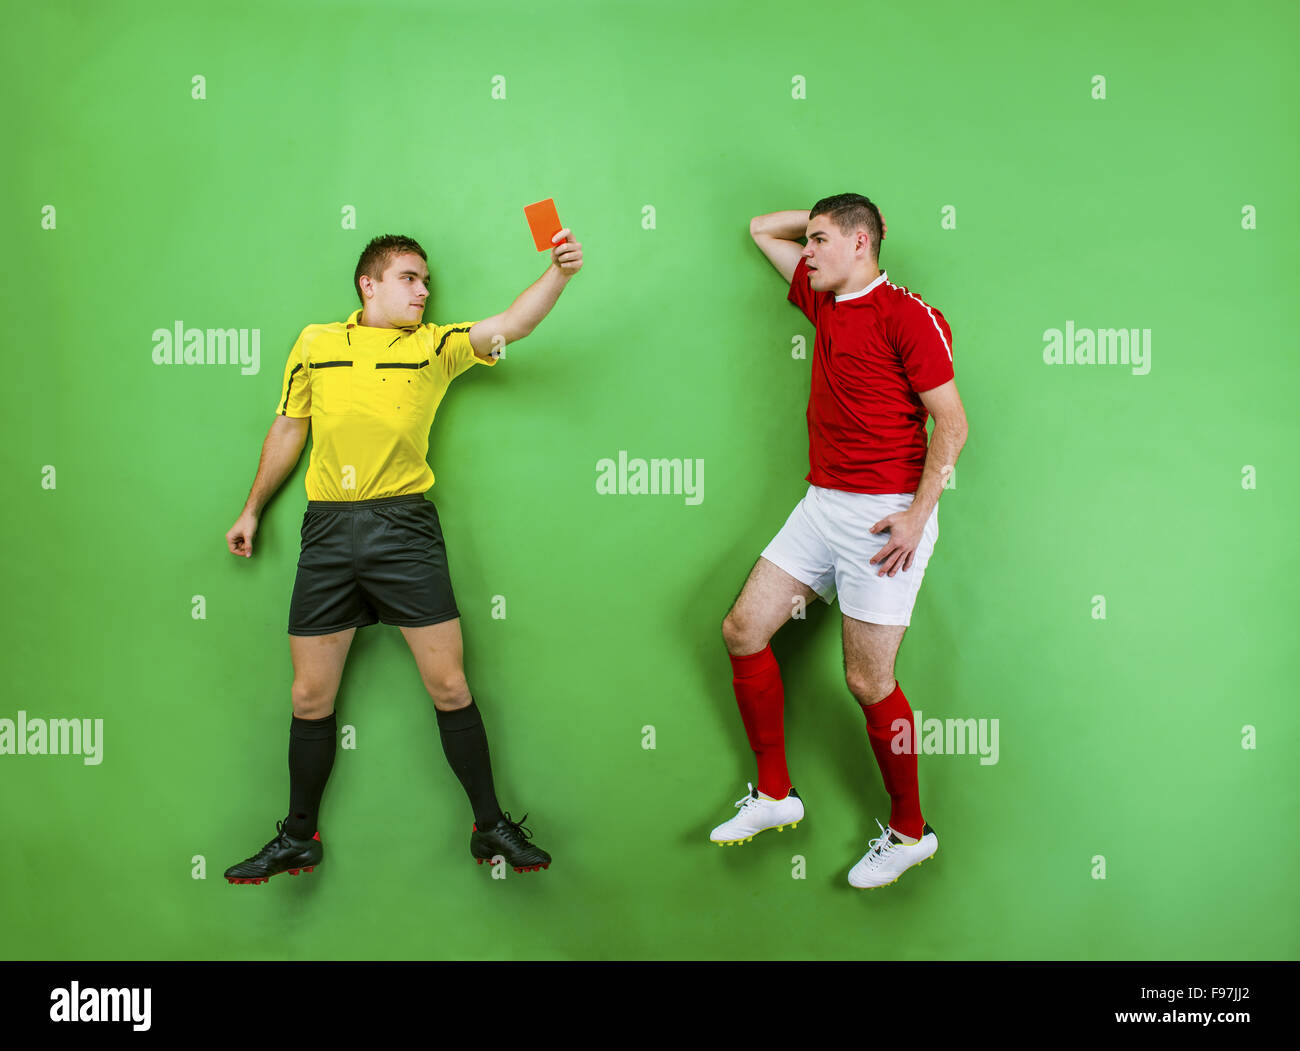 Referee giving red card to a football player. Studio shot on a green background. Stock Photo